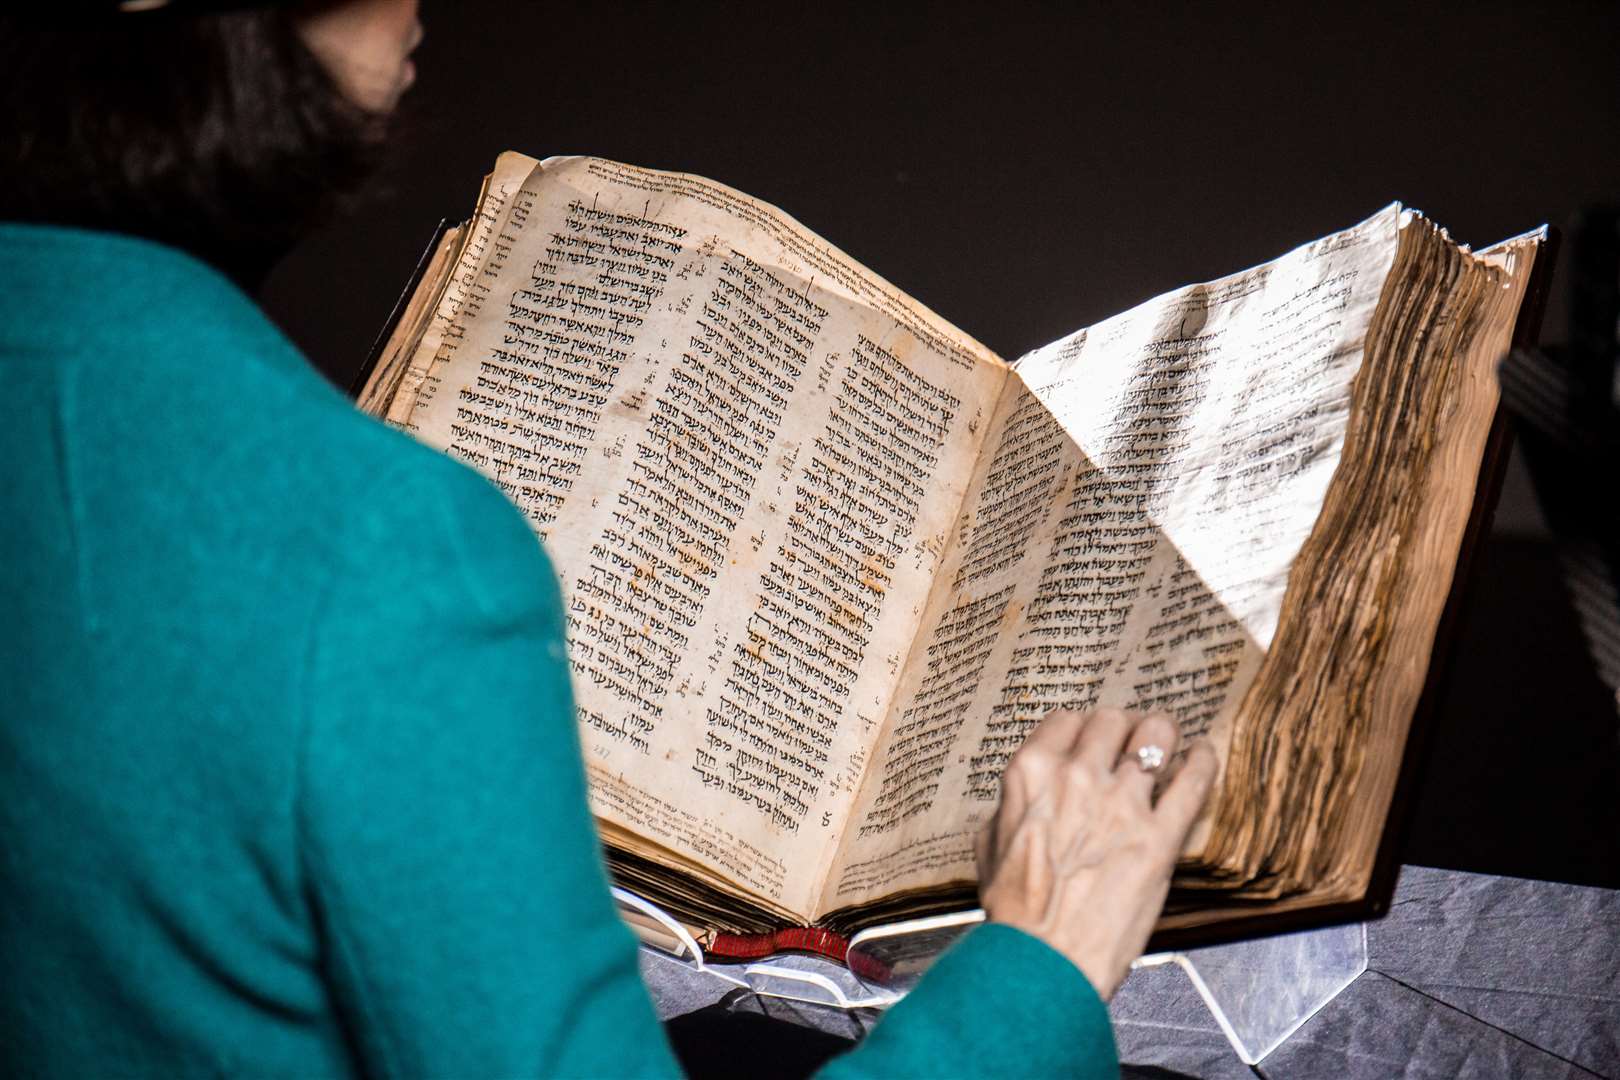 Codex Sassoon dates back to the ninth or tenth century (Sotheby’s/PA)